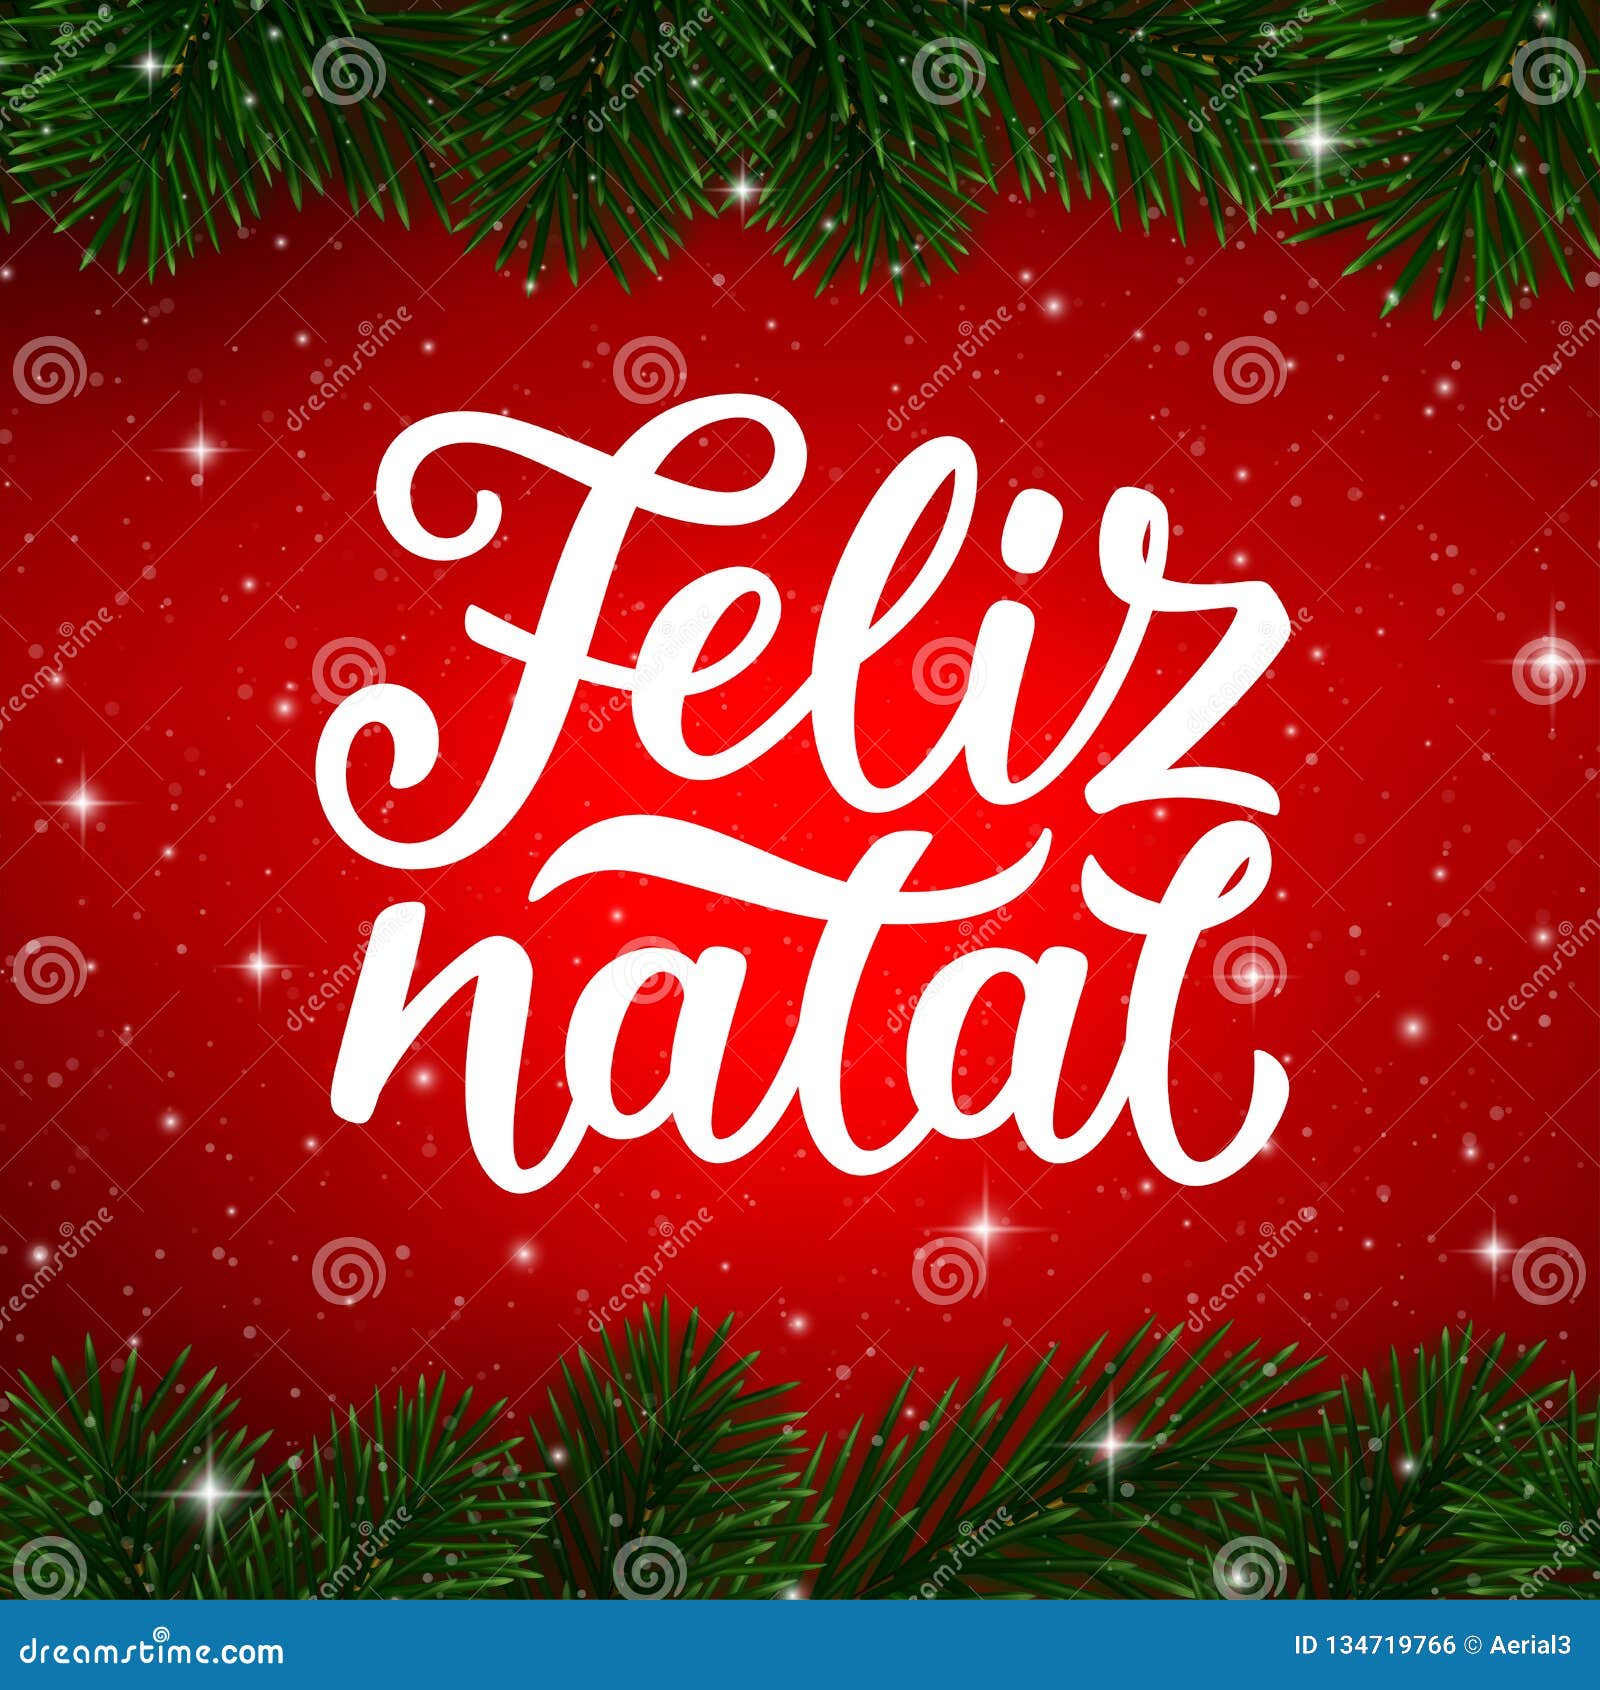 merry christmas calligraphy text in portuguese